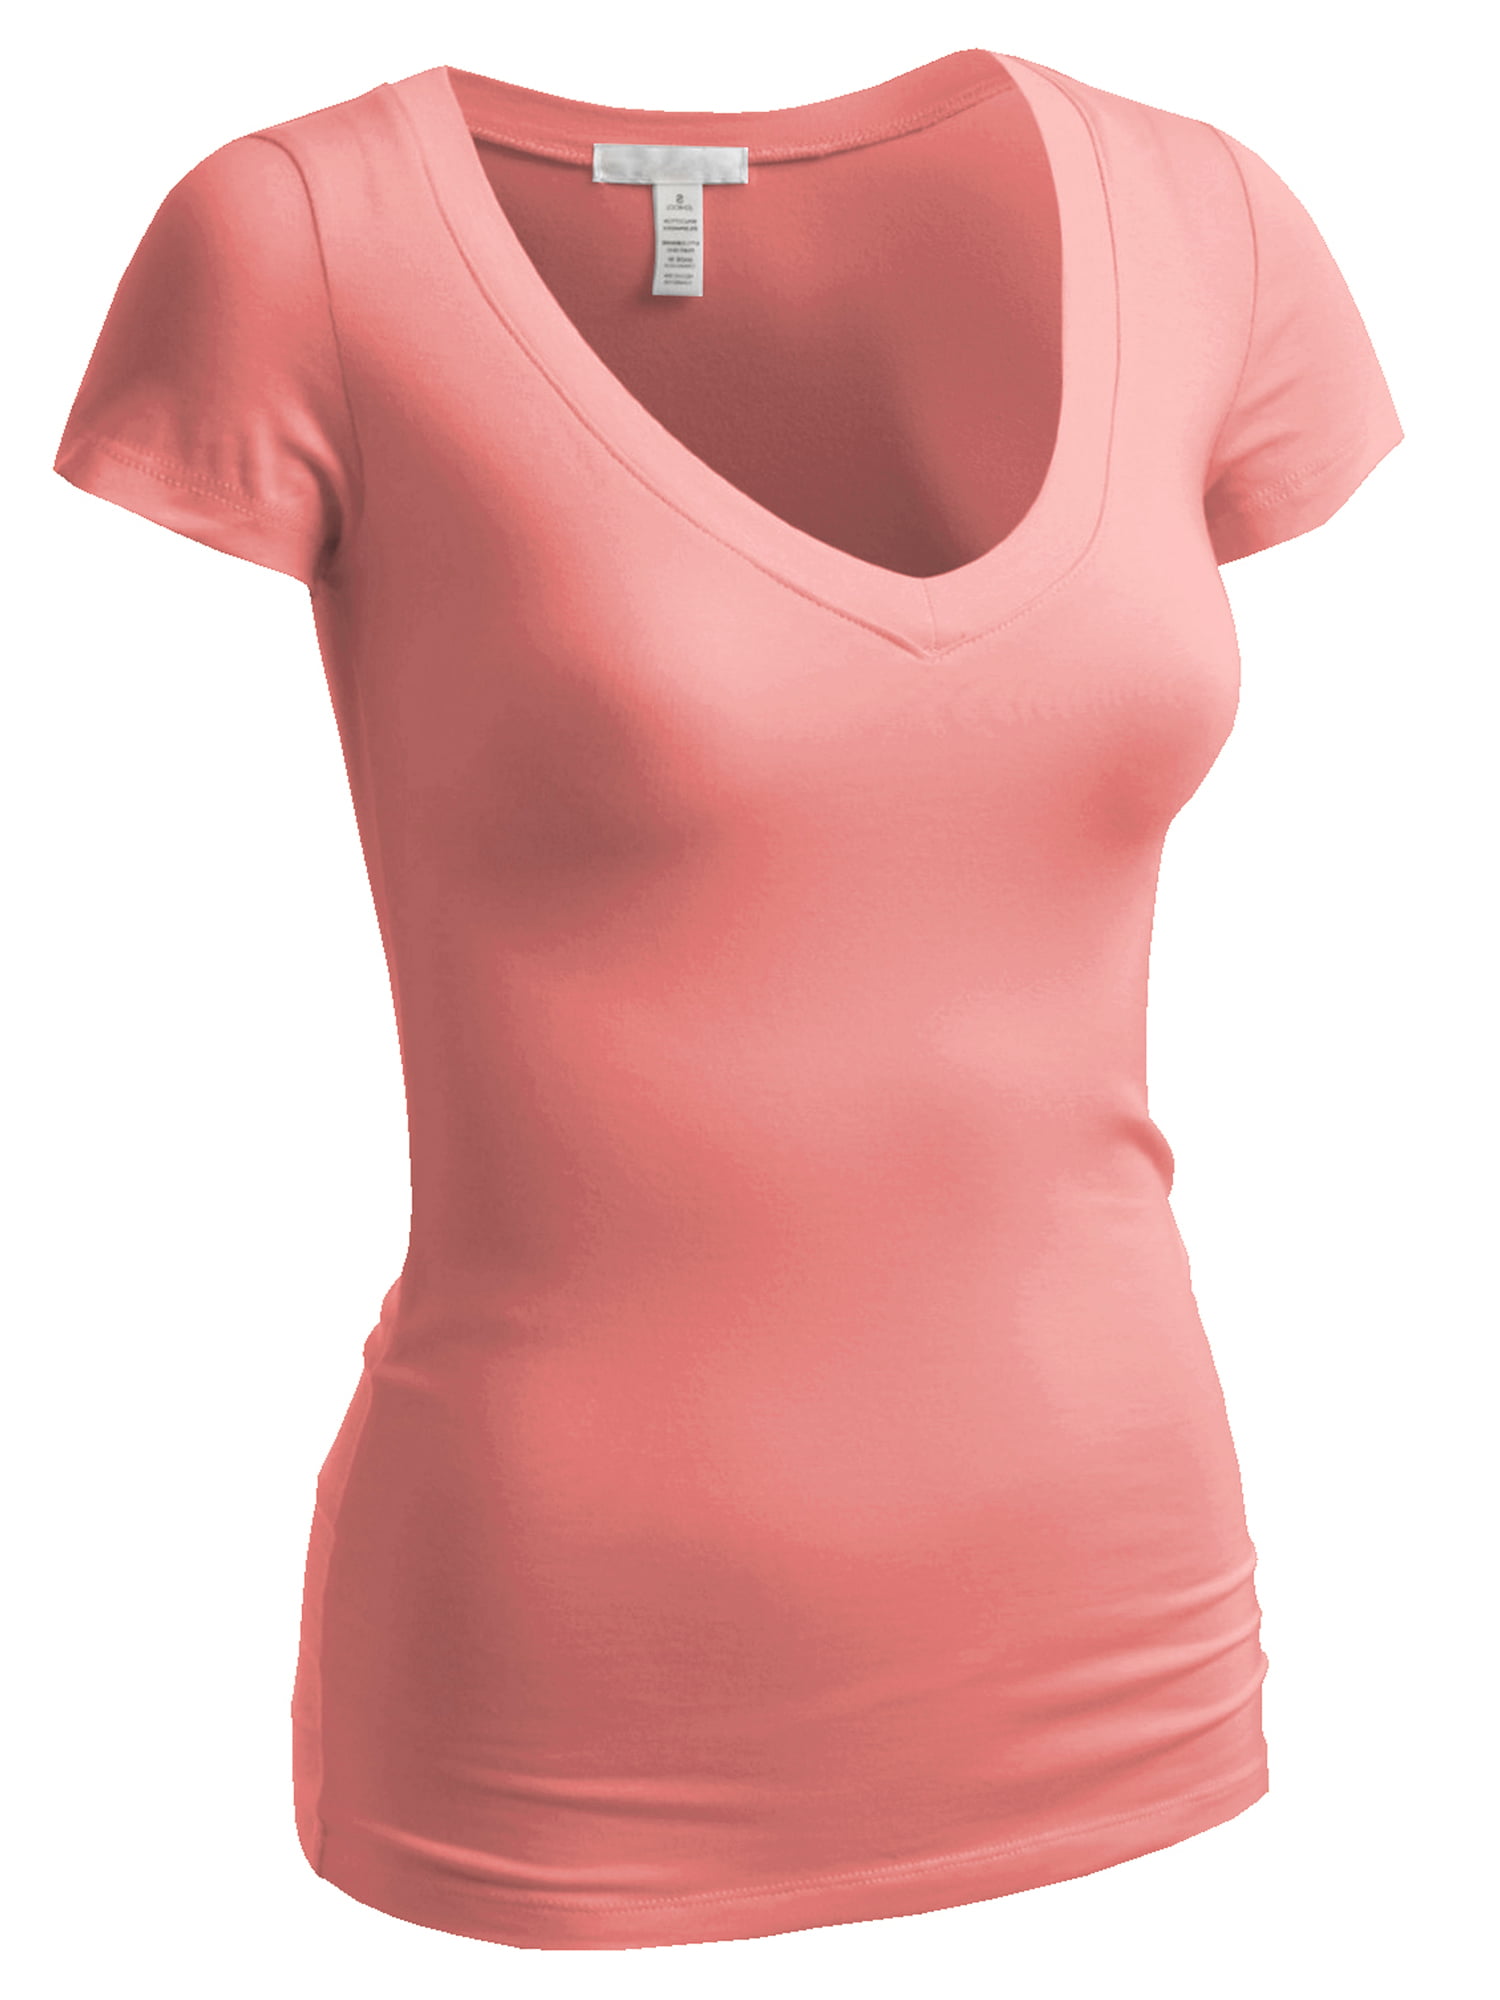 Details about   Sexy Top Small Scoop Neck Coral Pink Short Sleeve Fitted T-shirt Biker Gothic